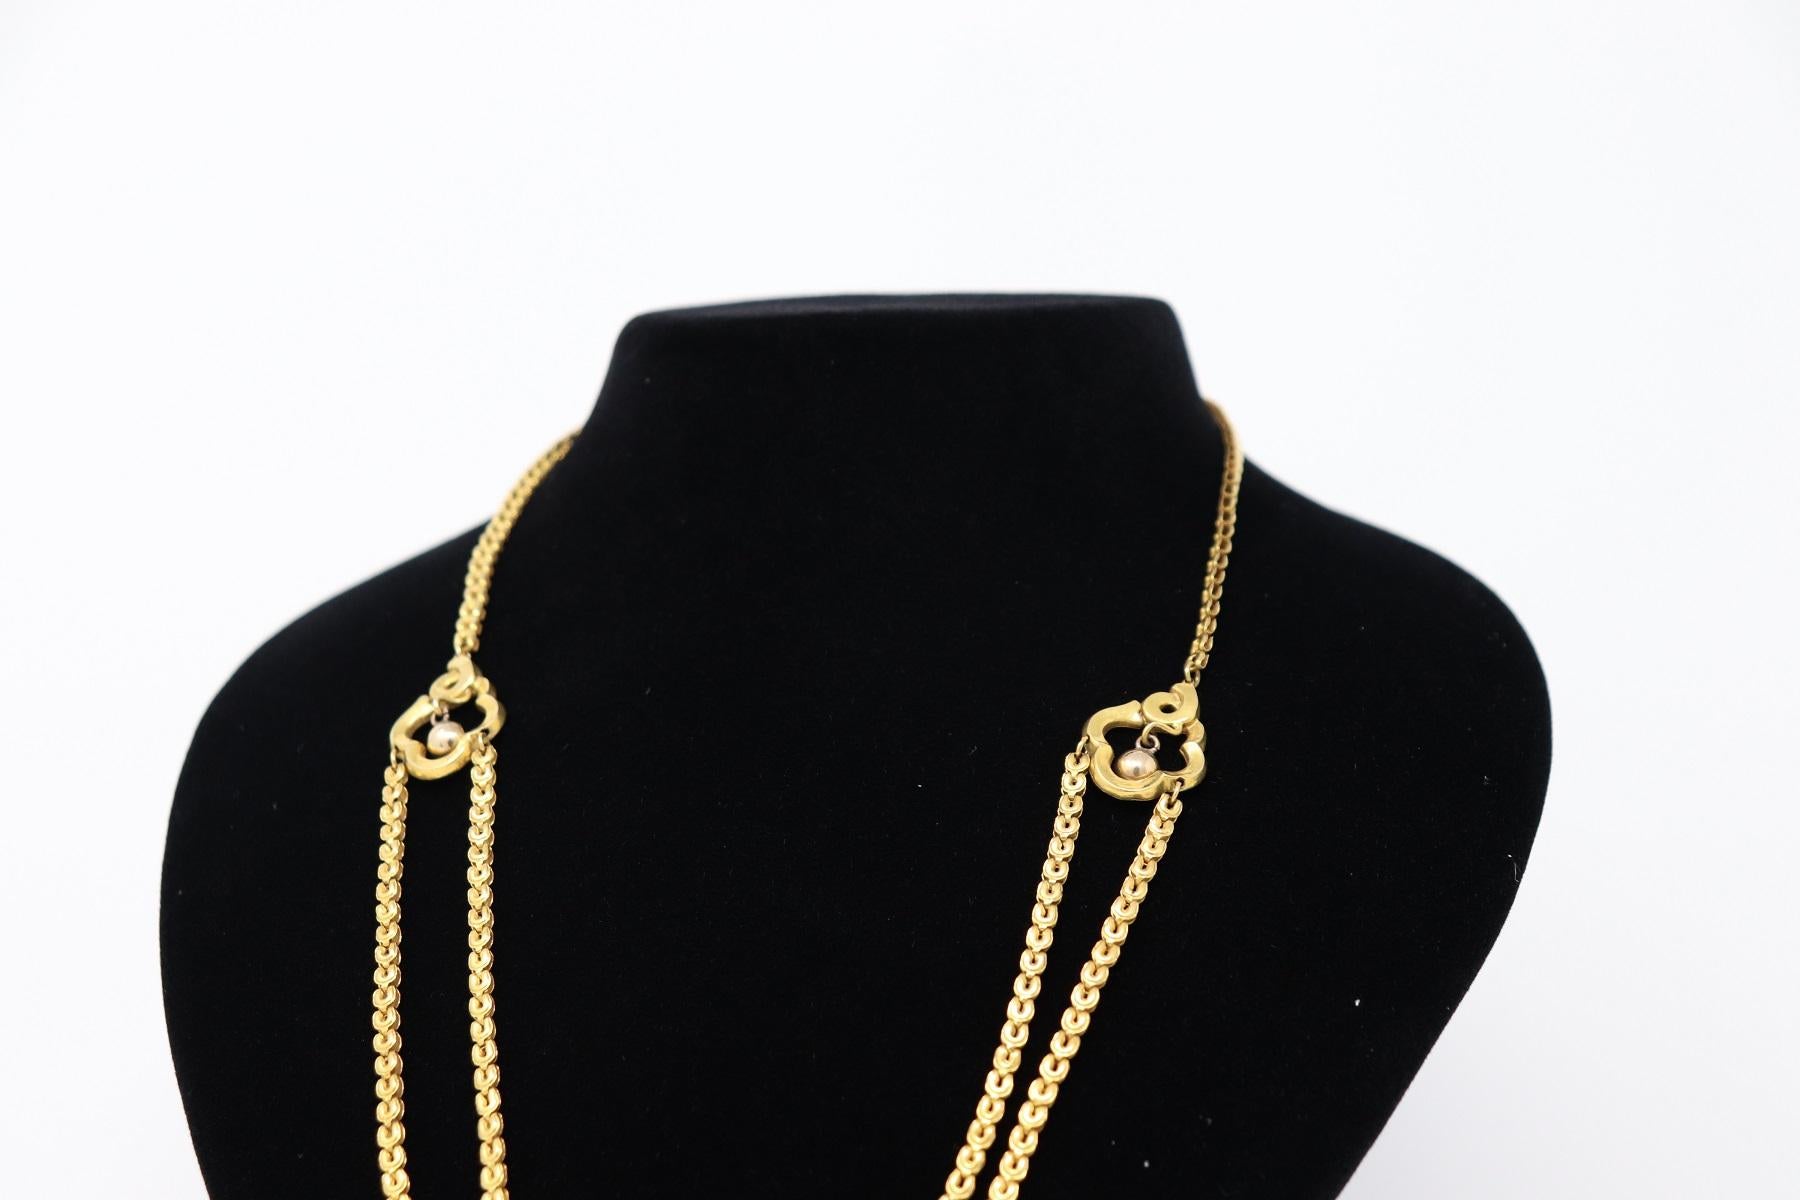 19th Century Gold Necklace with a Large Bourbon Pendant, 1850 In Excellent Condition For Sale In Bosco Marengo, IT